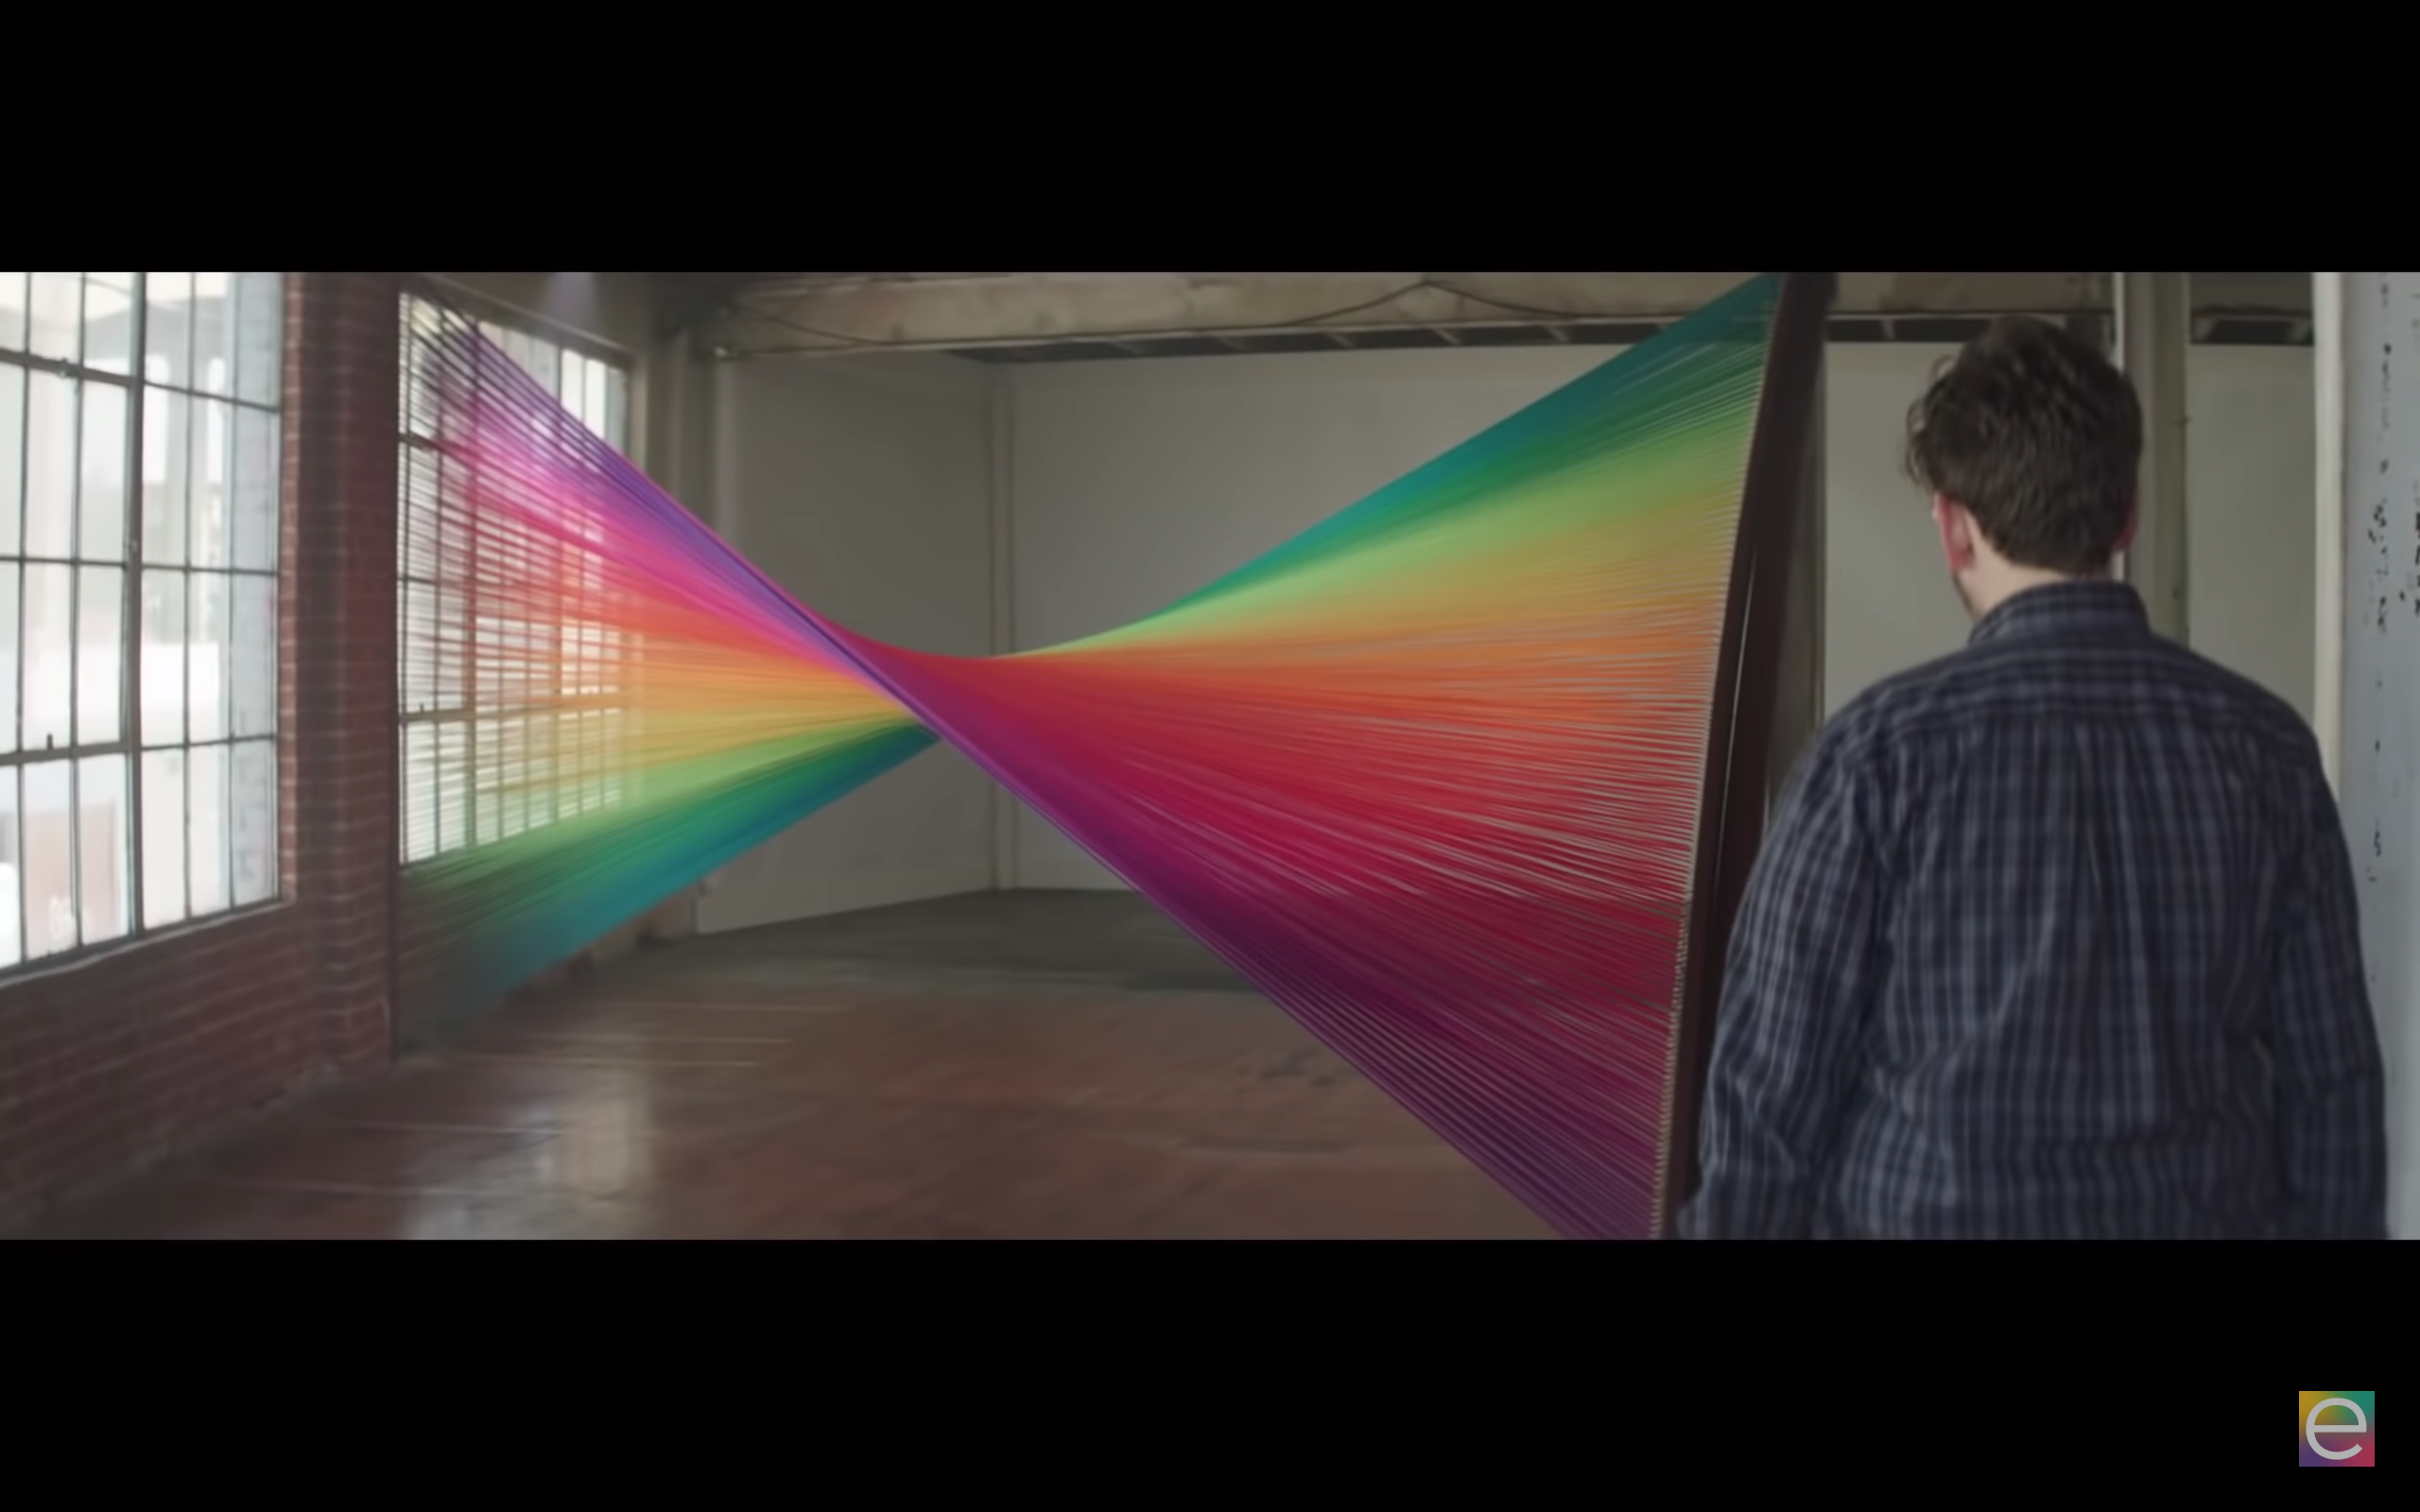 Image of a man standing in front of a large string rainbow colored installation inside a brightly lit room